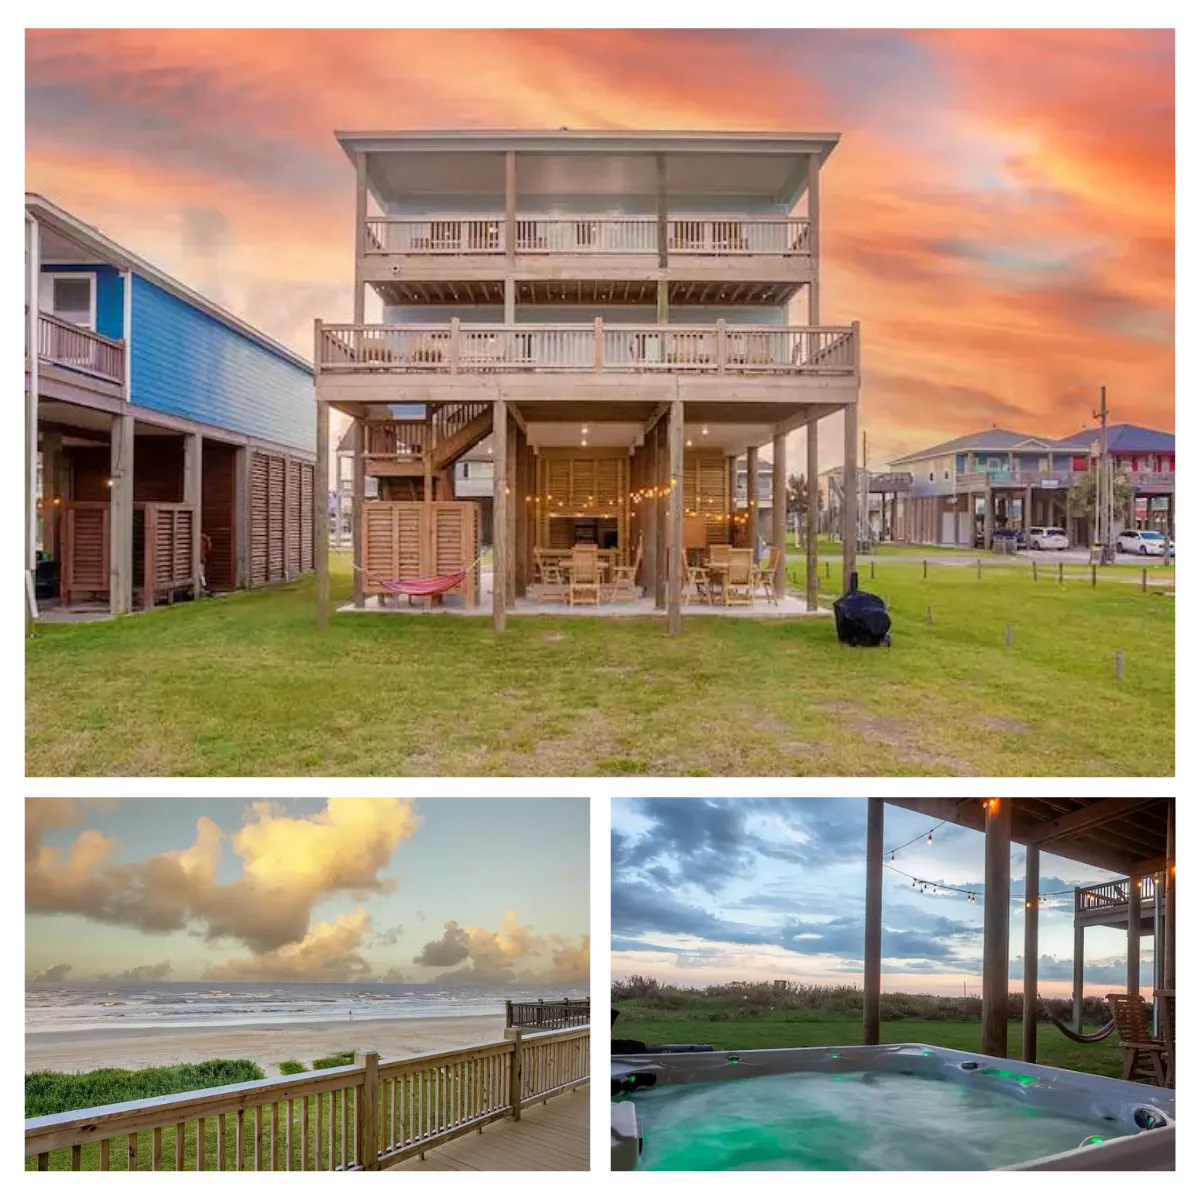 Relax at "Redfish Retreat" in Crystal Beach, TX, with a new 8-person hot tub under the house for your beachfront getaway.